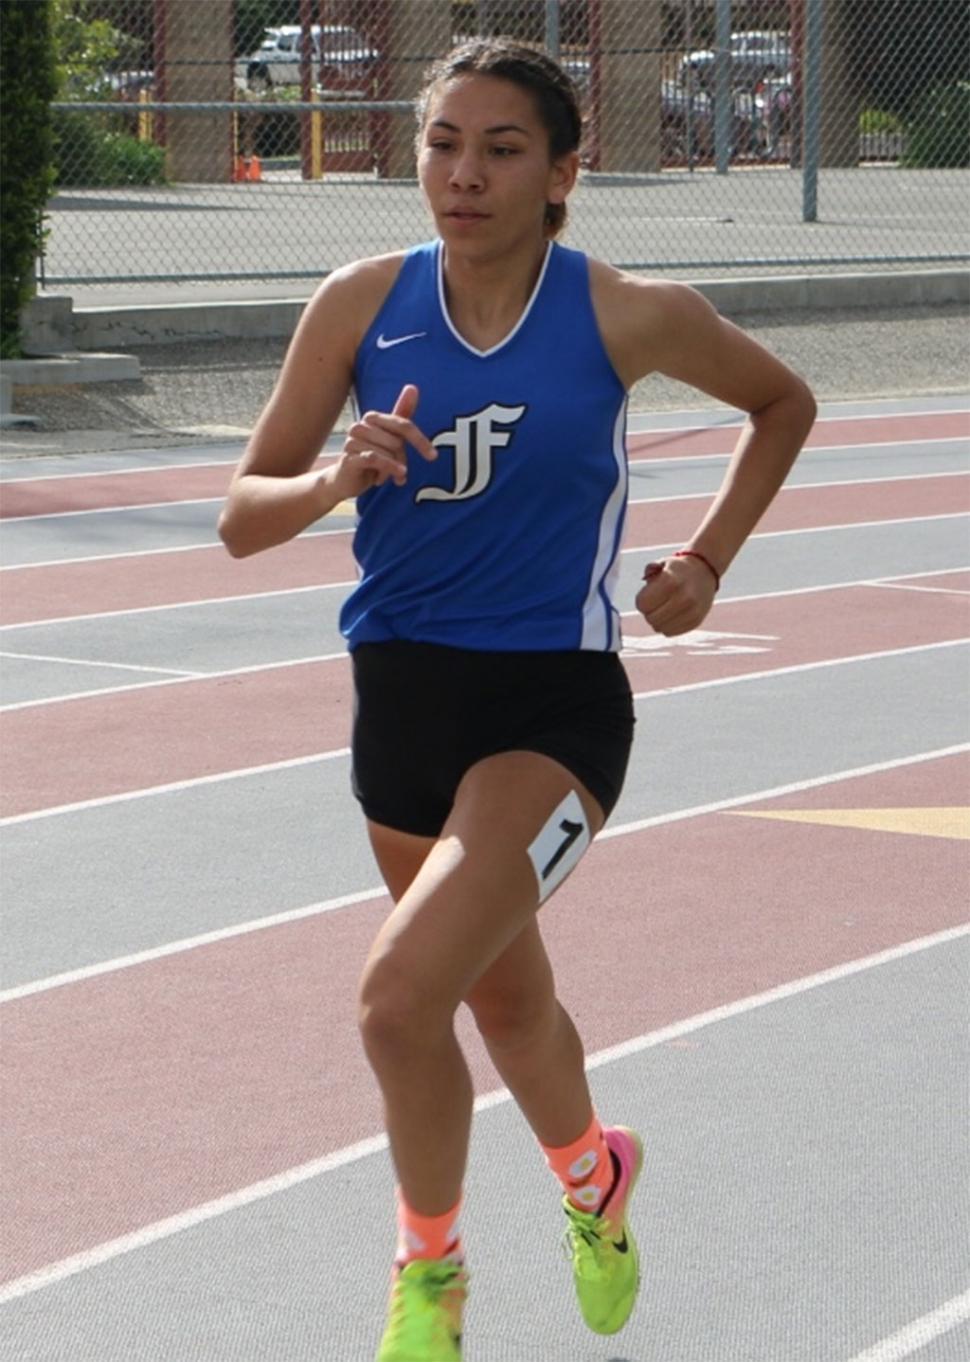 Fillmore High senior Diana Perez advances to the CIF SS Division 4 Finals at El Camino College in the 1600m this weekend. Diana ran a personal best this past Saturday at the CIF SS Division 4 Prelims with a time of 5:10. Way to run, Diana!